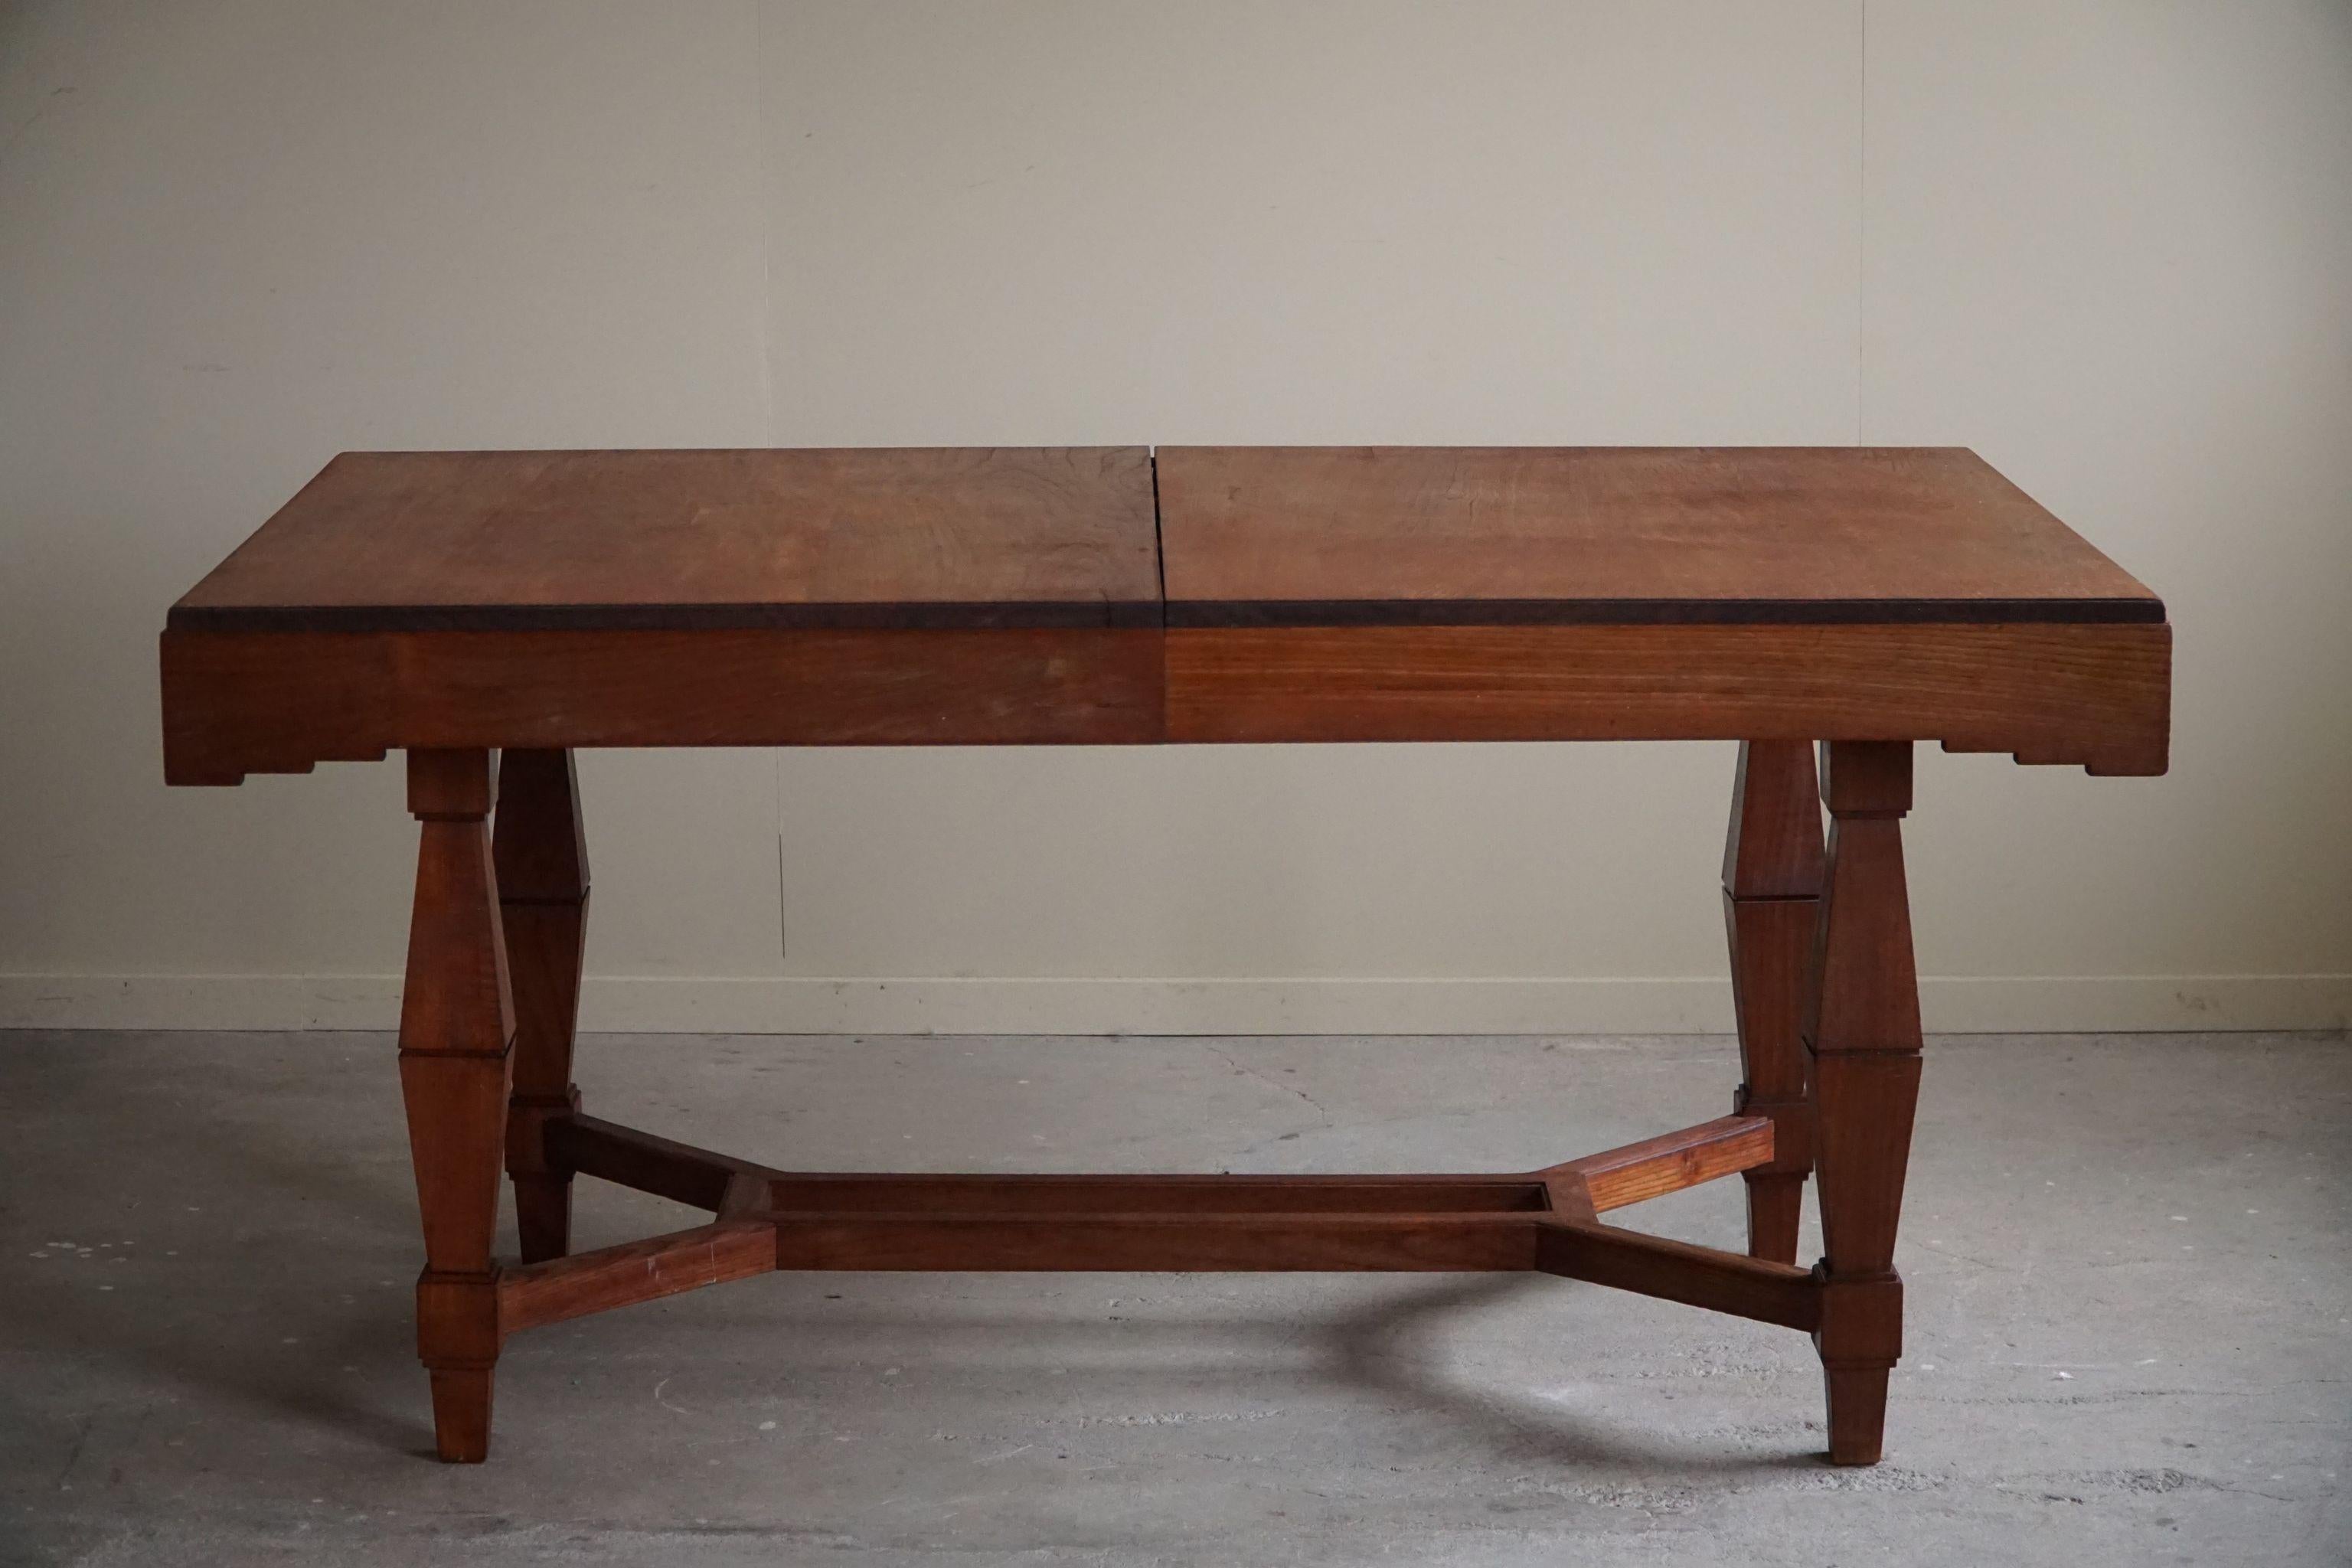 Art Deco Dining Table in Teak, with Butterfly Leaf, Danish Cabinetmaker, 1940s For Sale 15